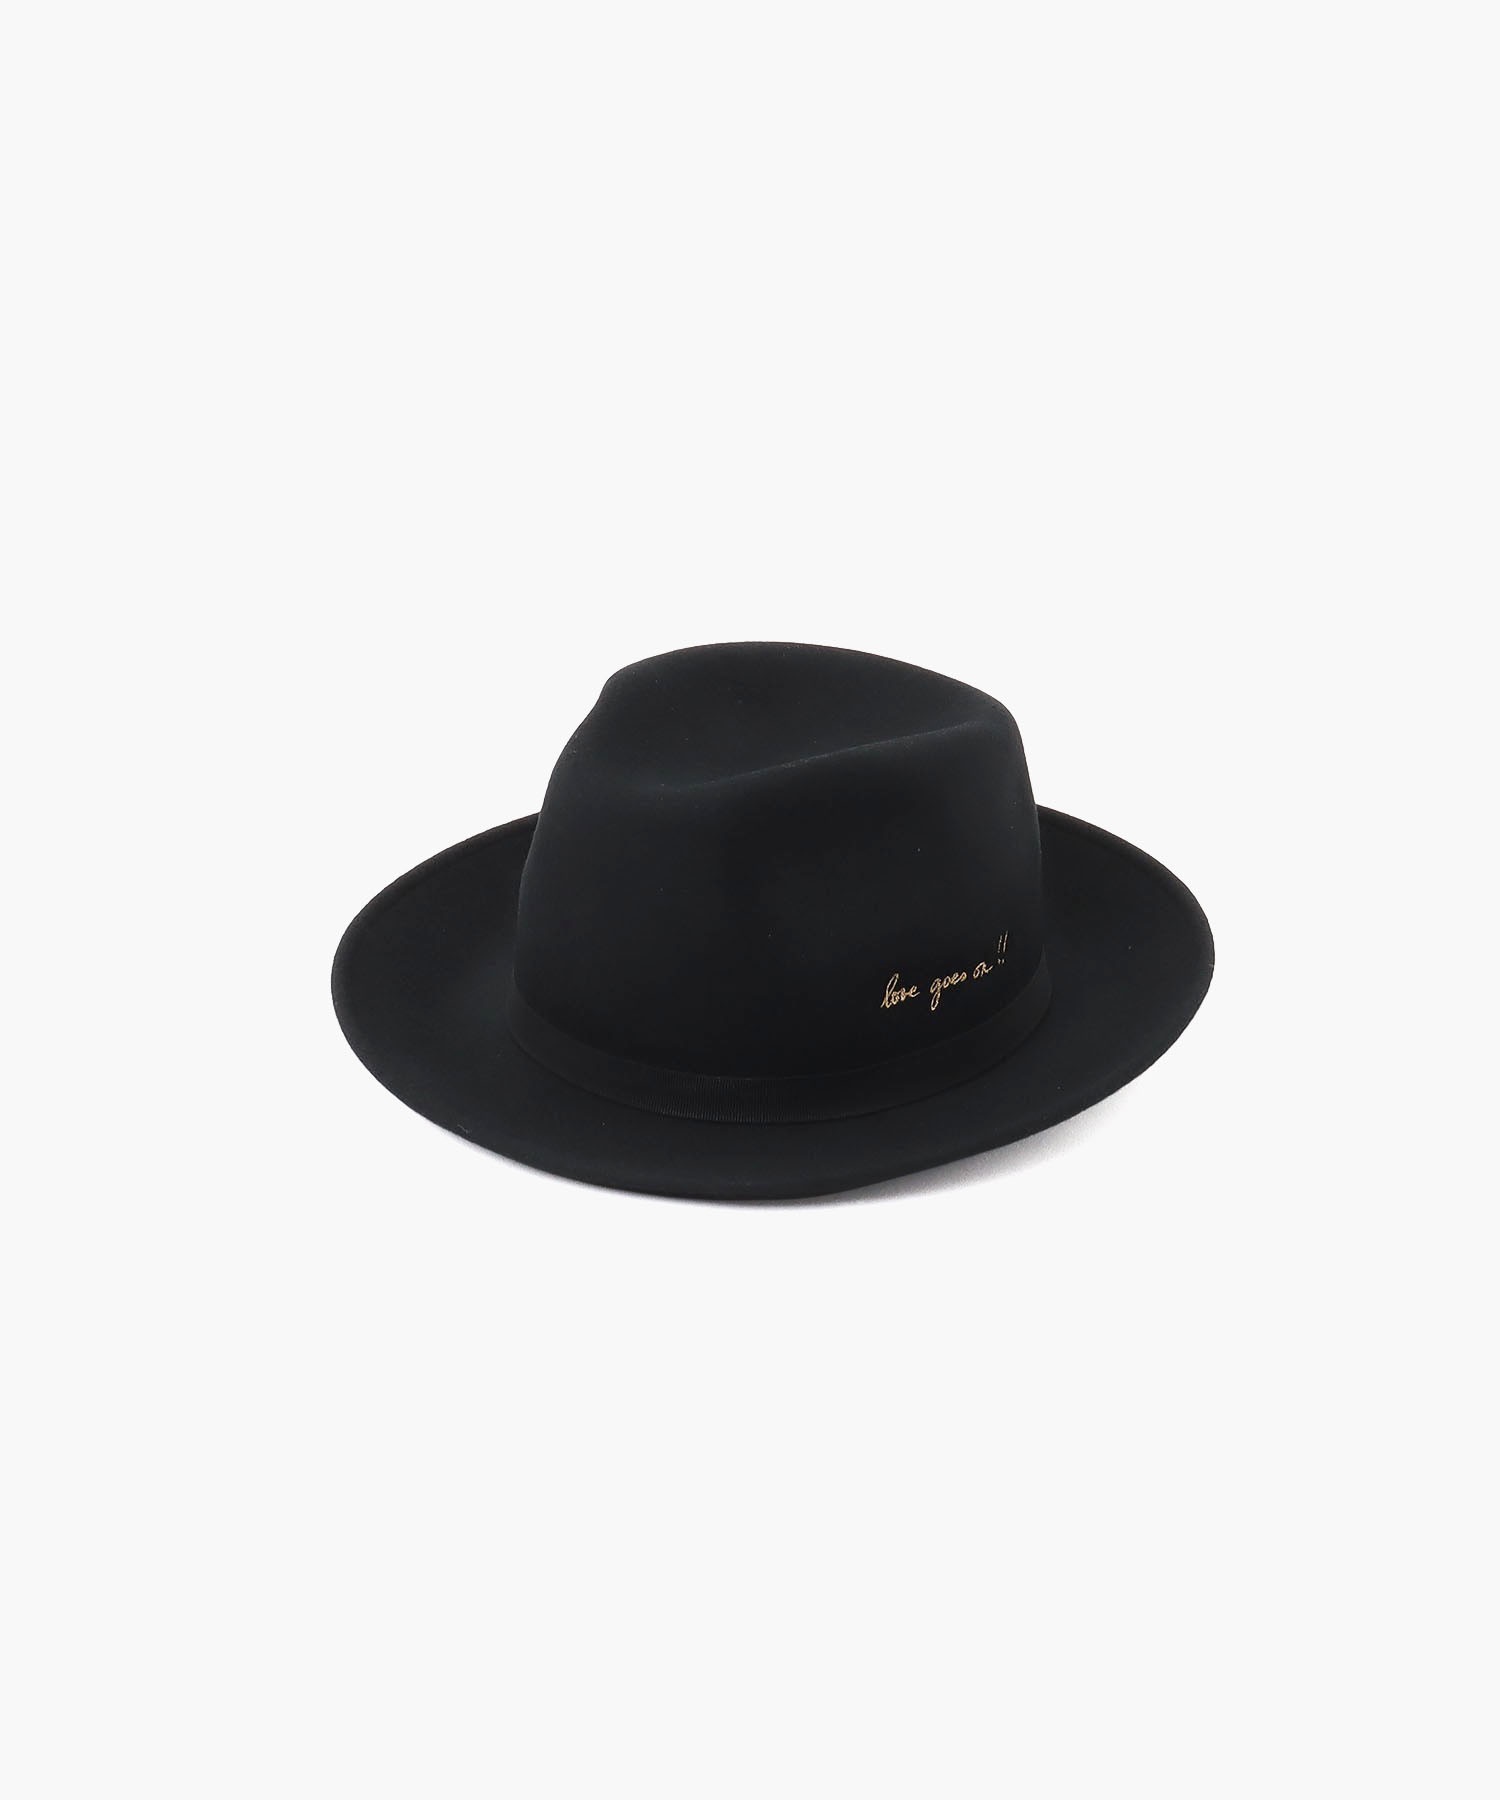 【Outlet】AN42 CHAPEAUX 'love goes on’ フェルトハット